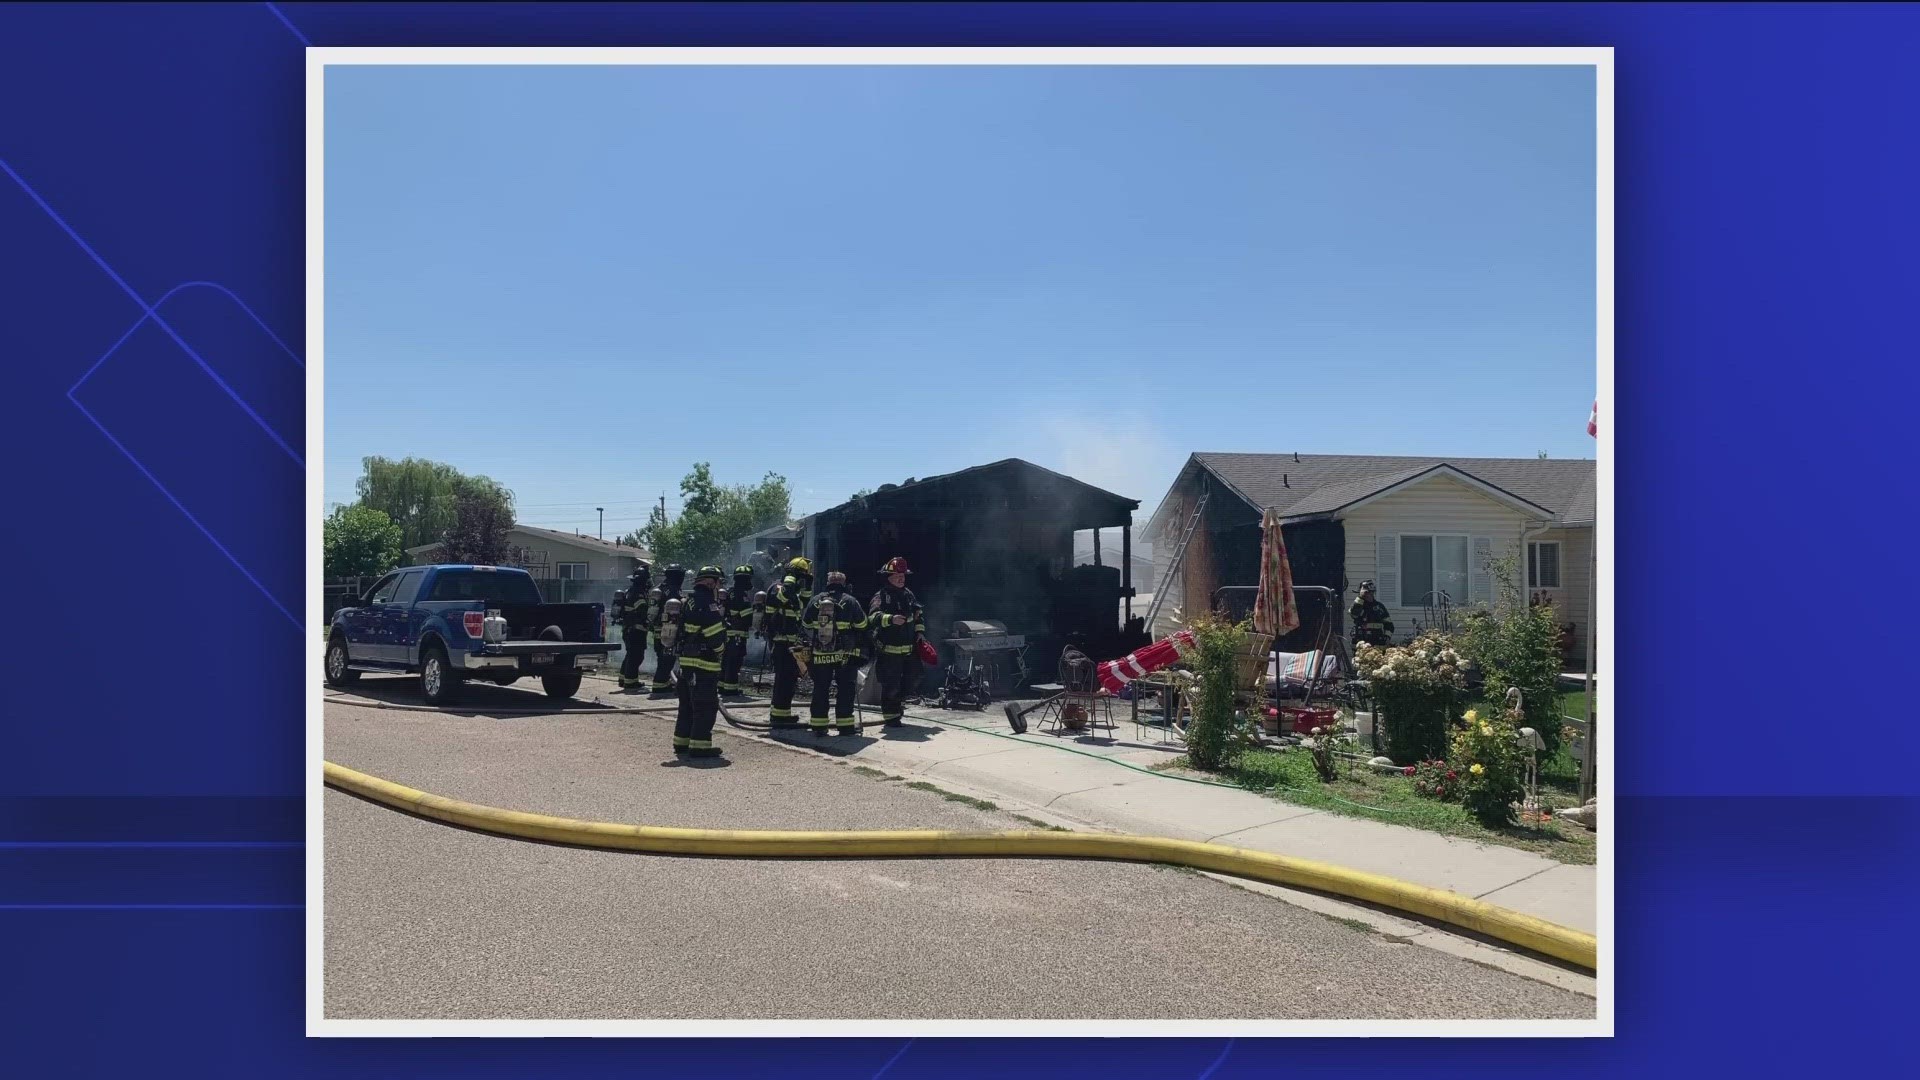 The Caldwell Fire Department said two men were injured and three dogs were killed in a fire Friday that damaged two homes and a vehicle.